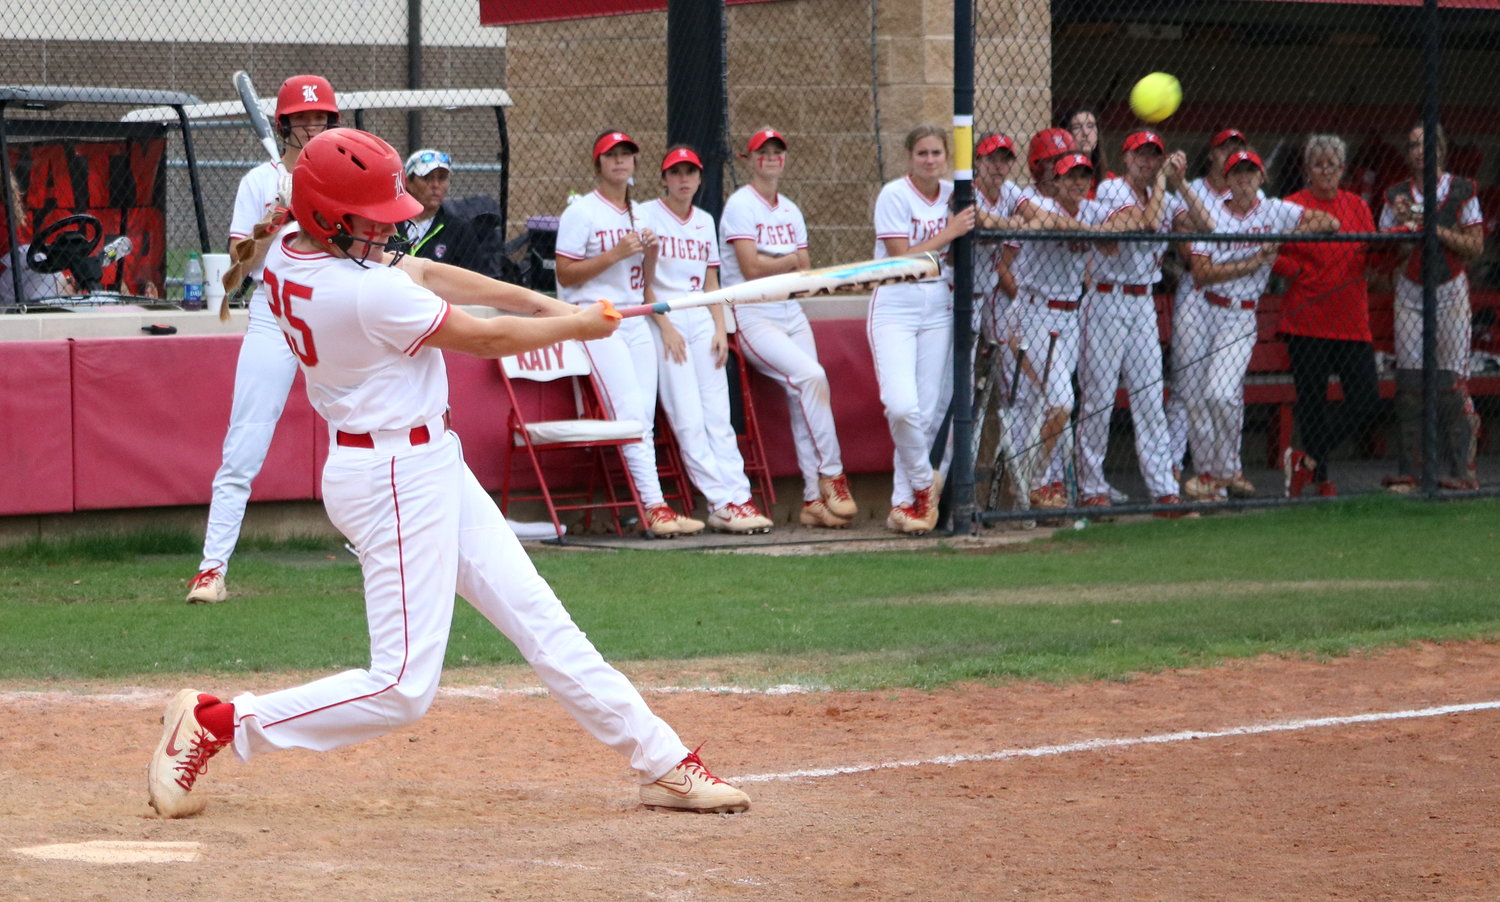 Cameryn Harrison hits a ball to left field during Tuesday’s game between Katy and Taylor at the Katy softball field.